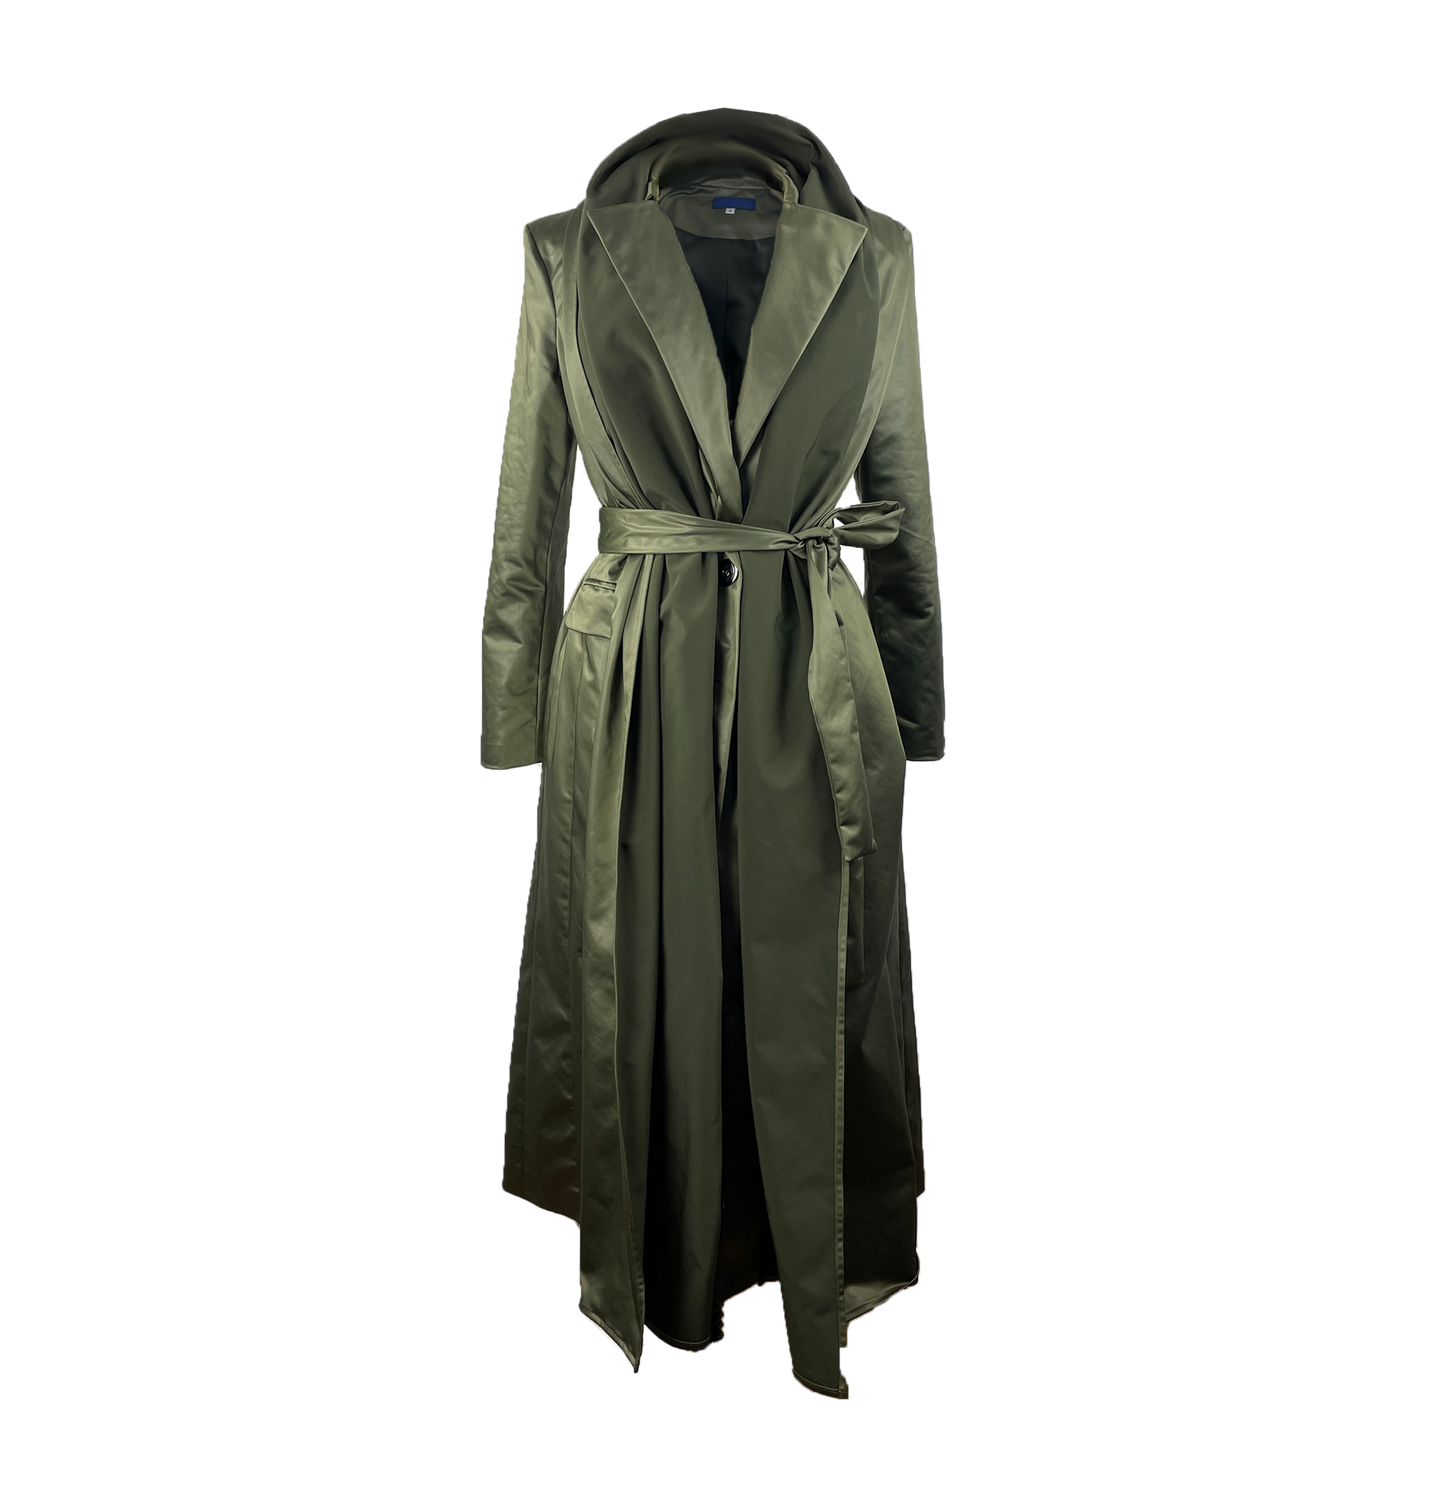 Light Olive stretch satin coat with transformable zippers and self tie belt